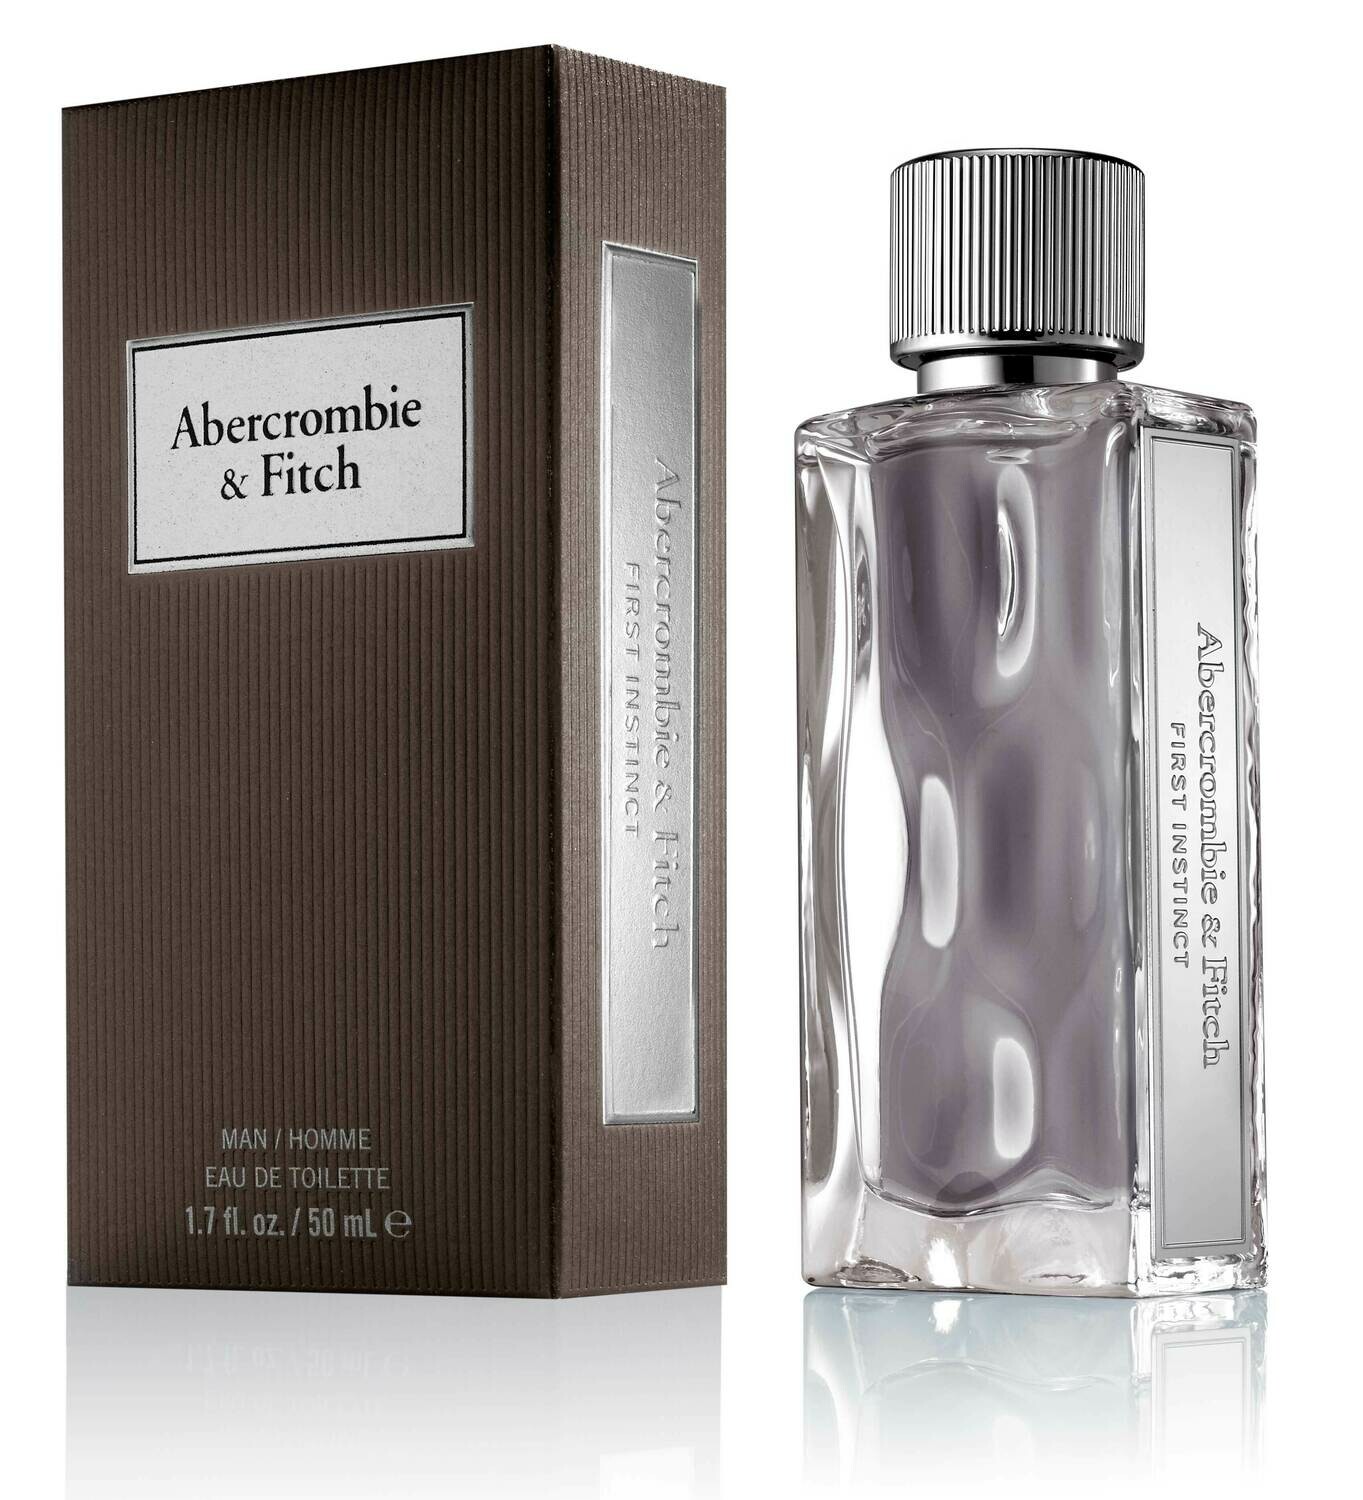 First Instinct - Abercrombie & Fitch